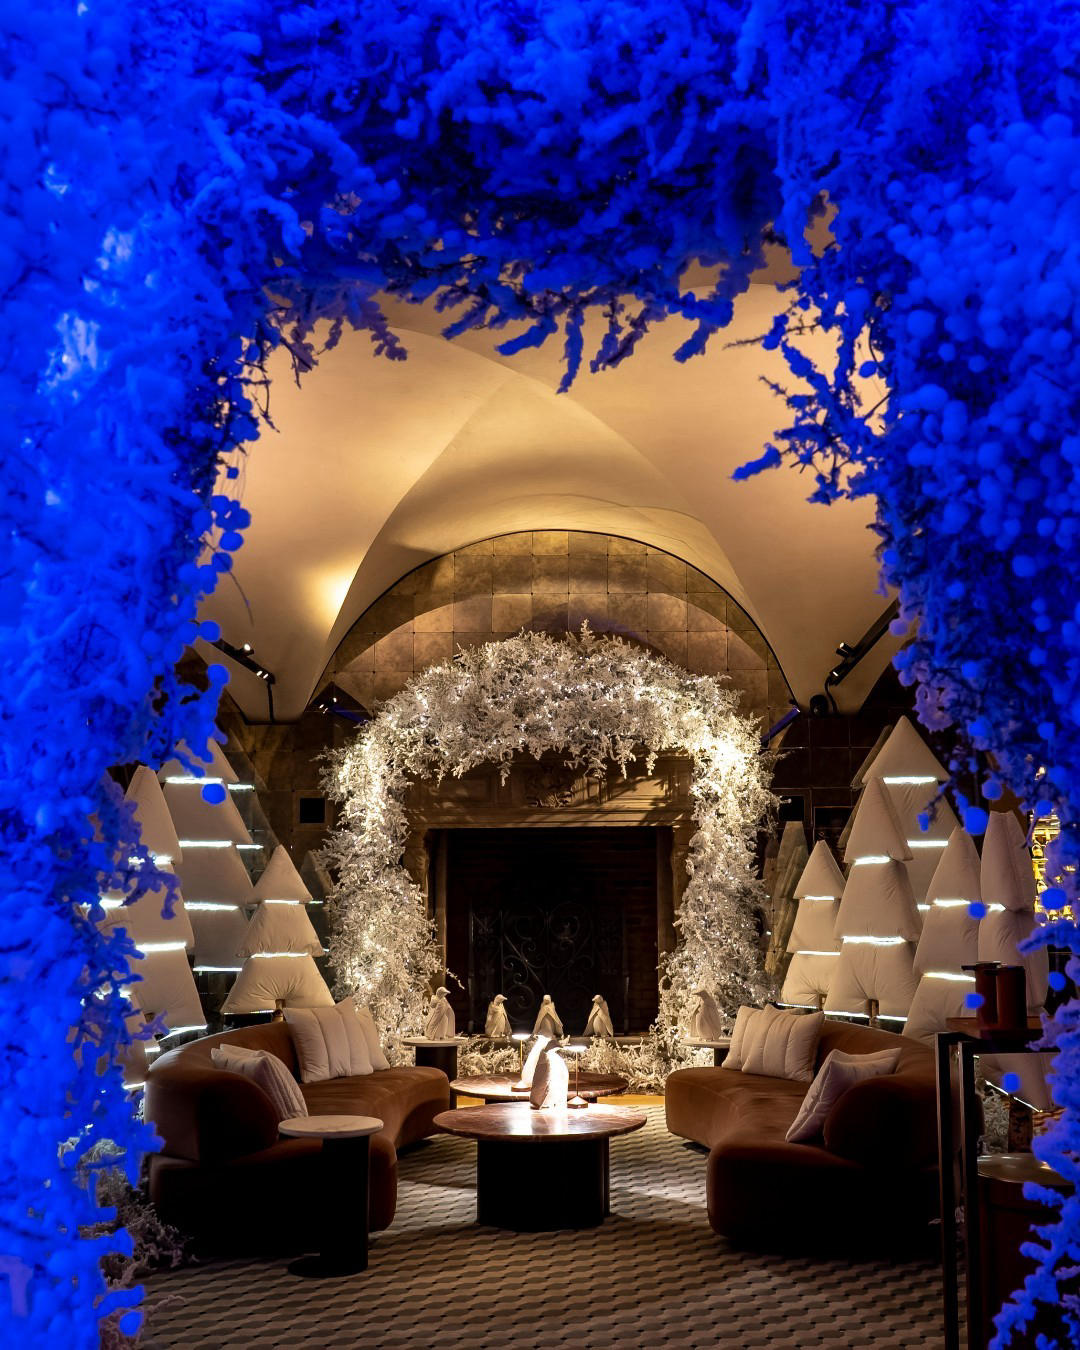 Four Seasons Hotel Milano - Make it a December to remember